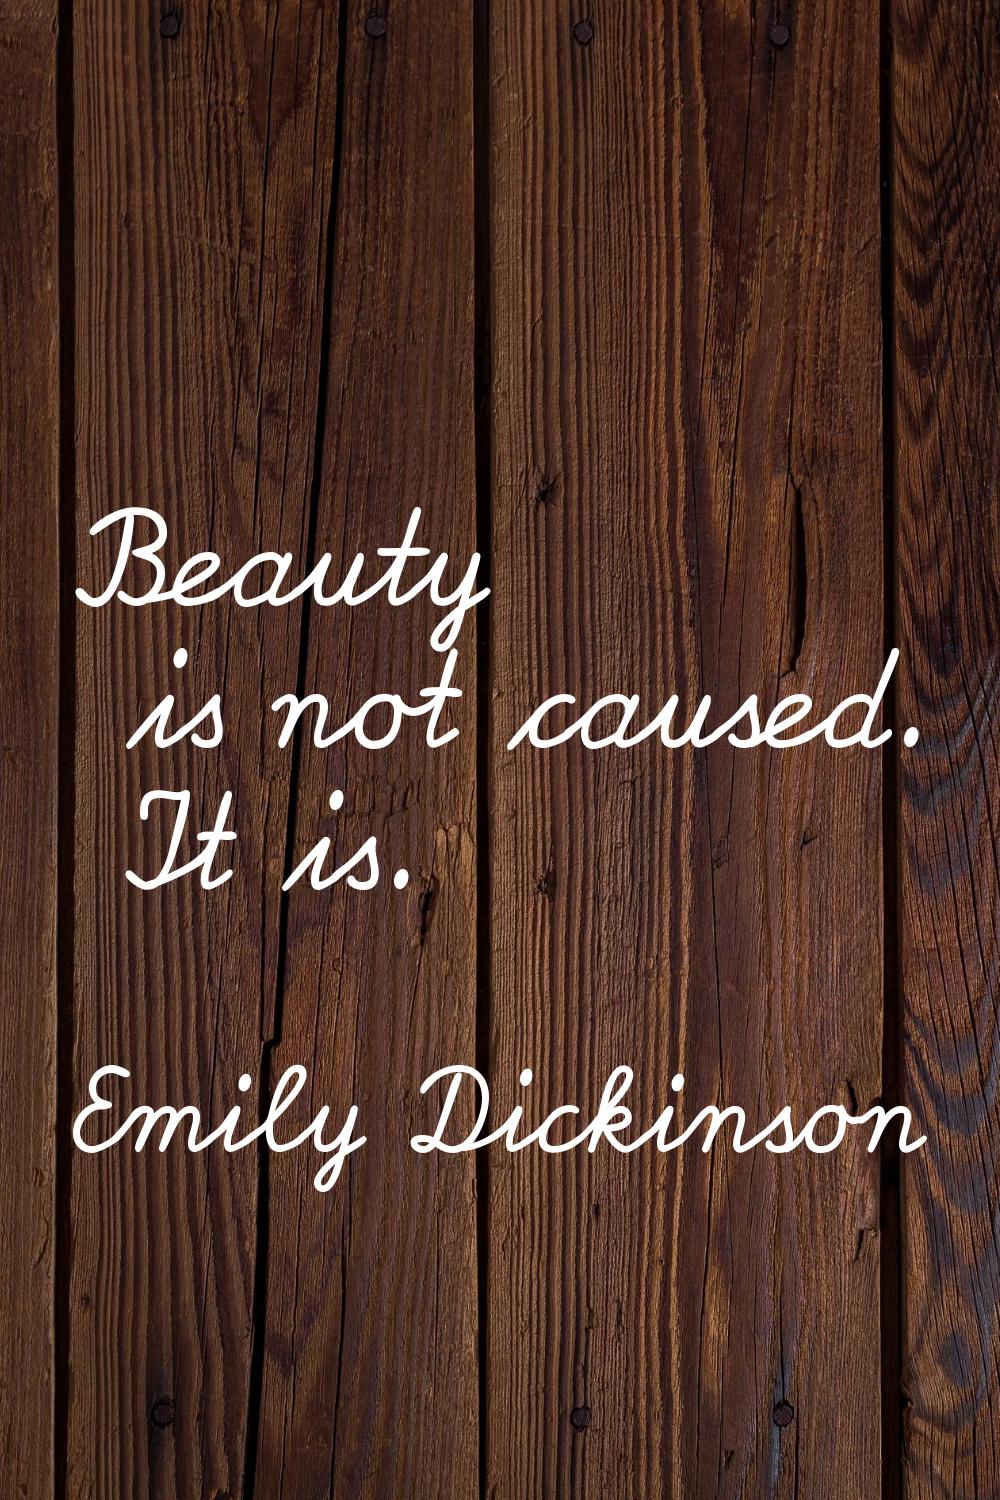 Beauty is not caused. It is.